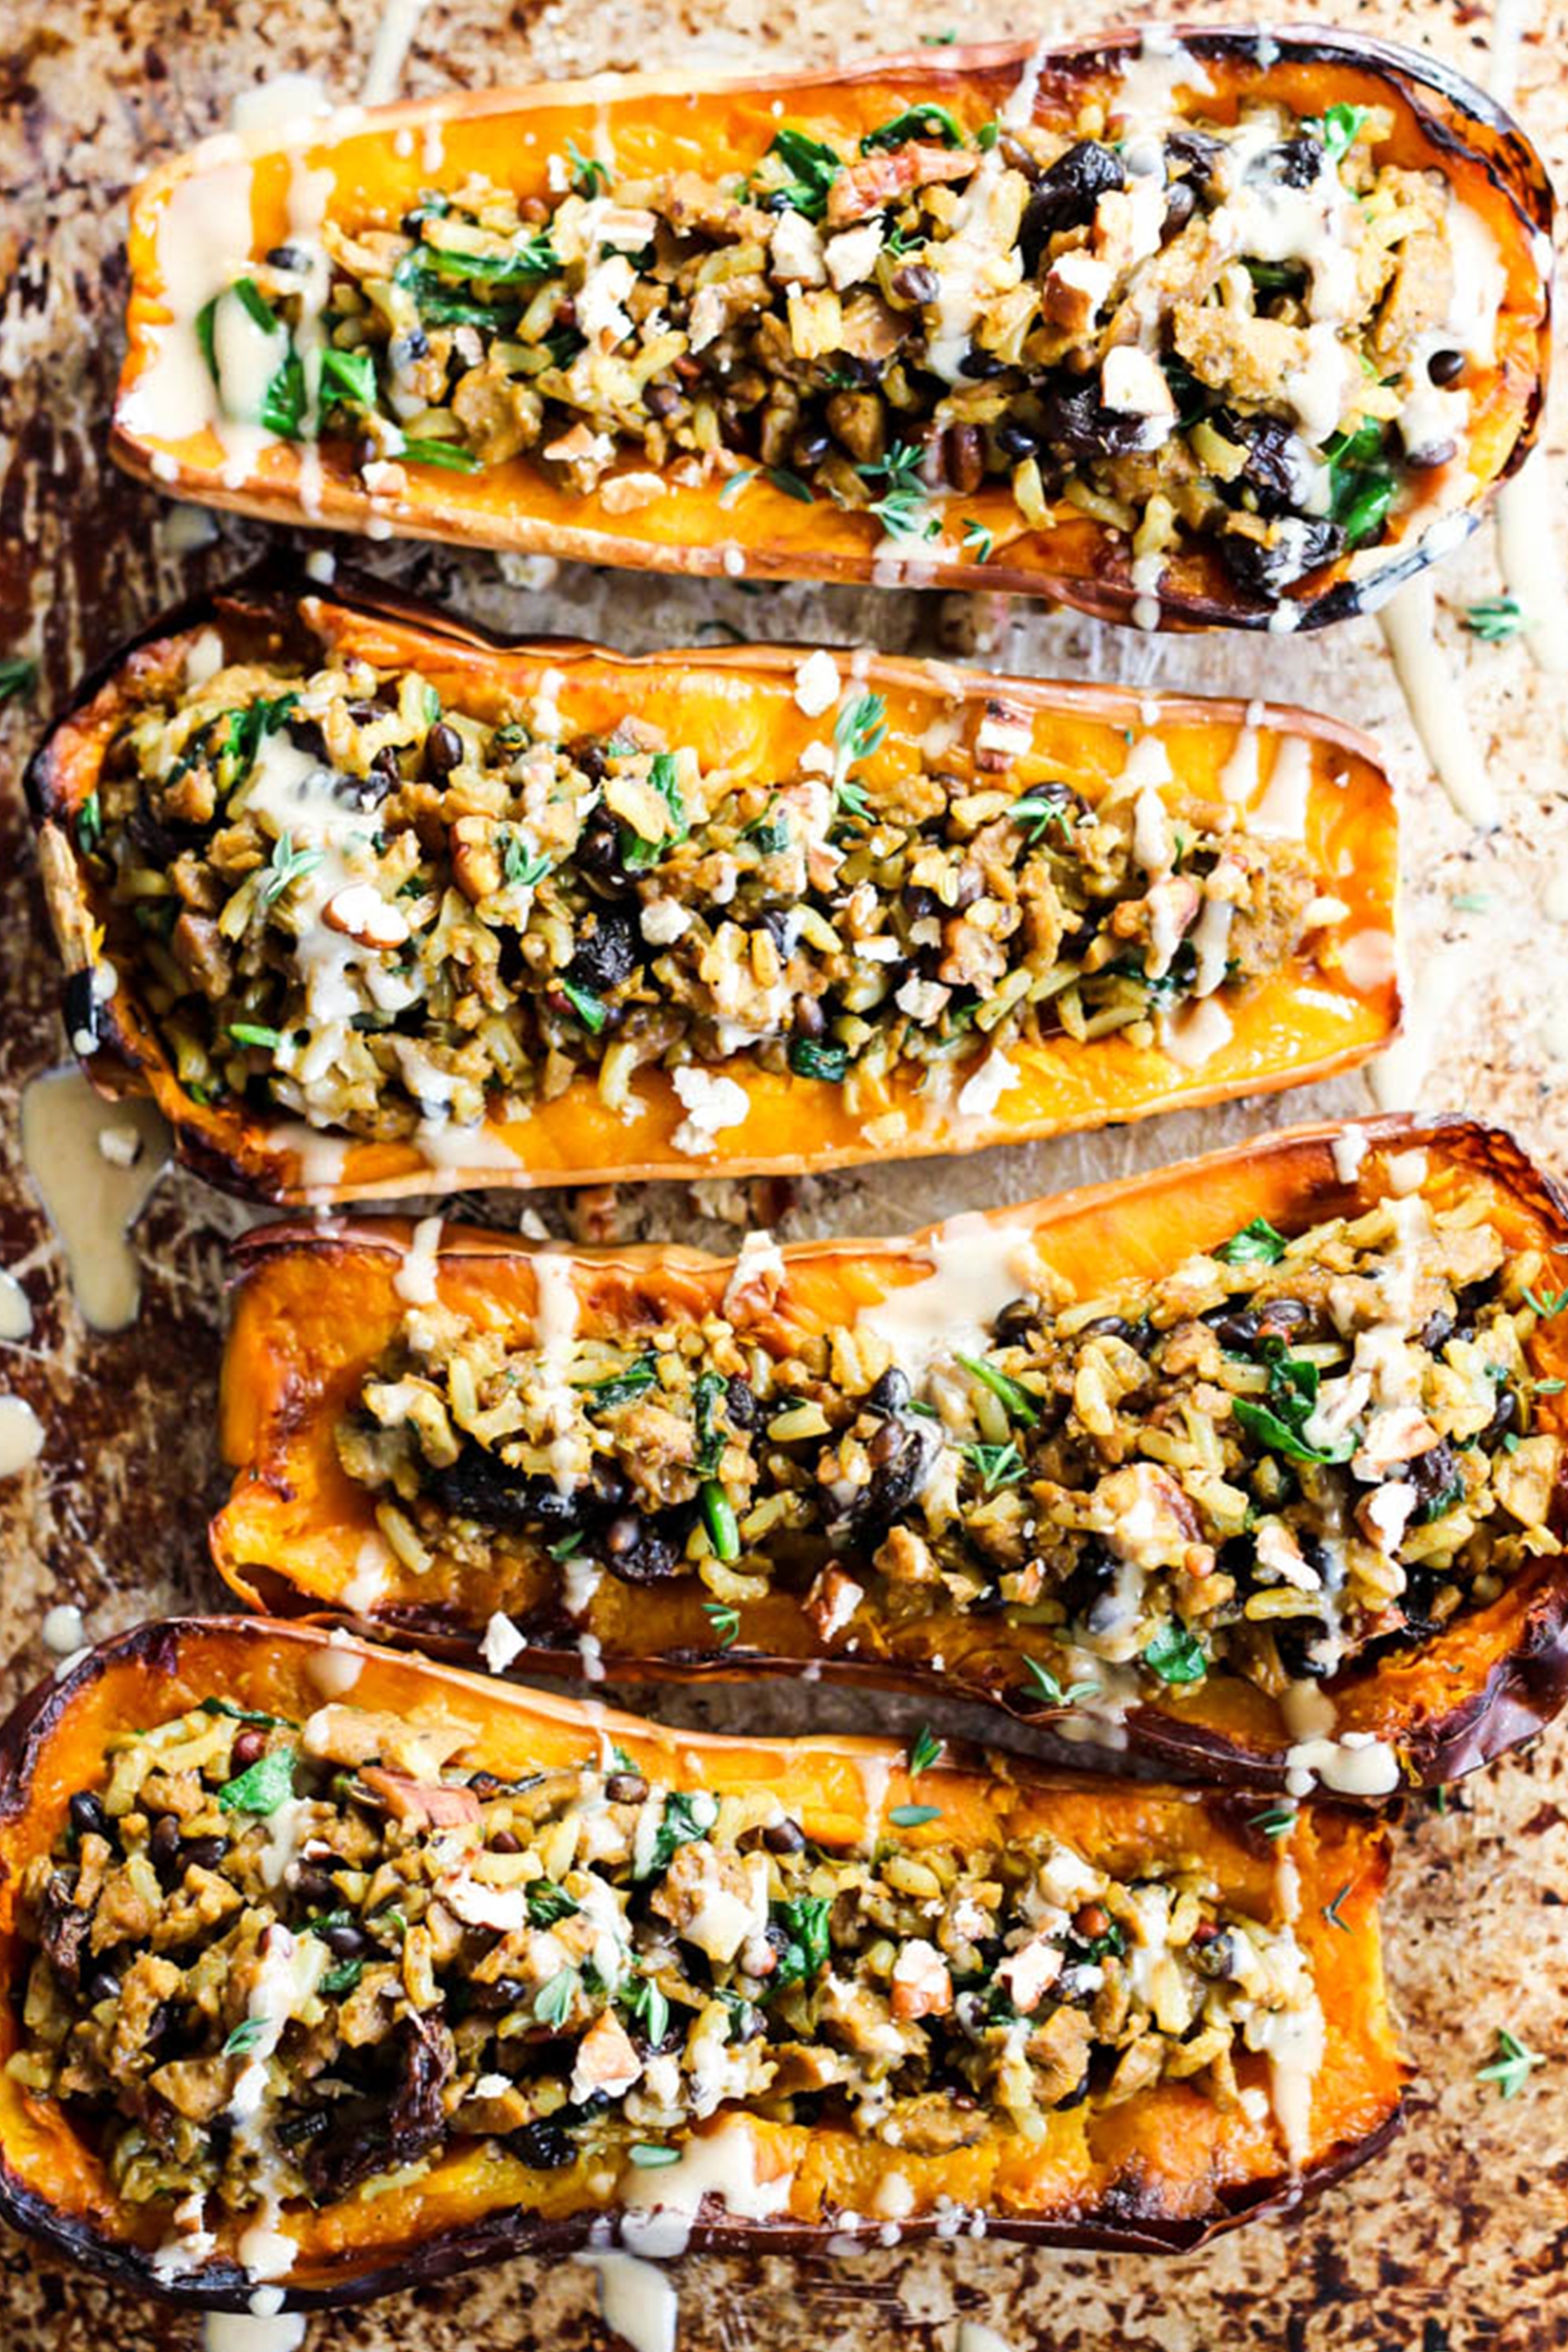 butternut squashes that have been filled with a grain and vegan sausage filling